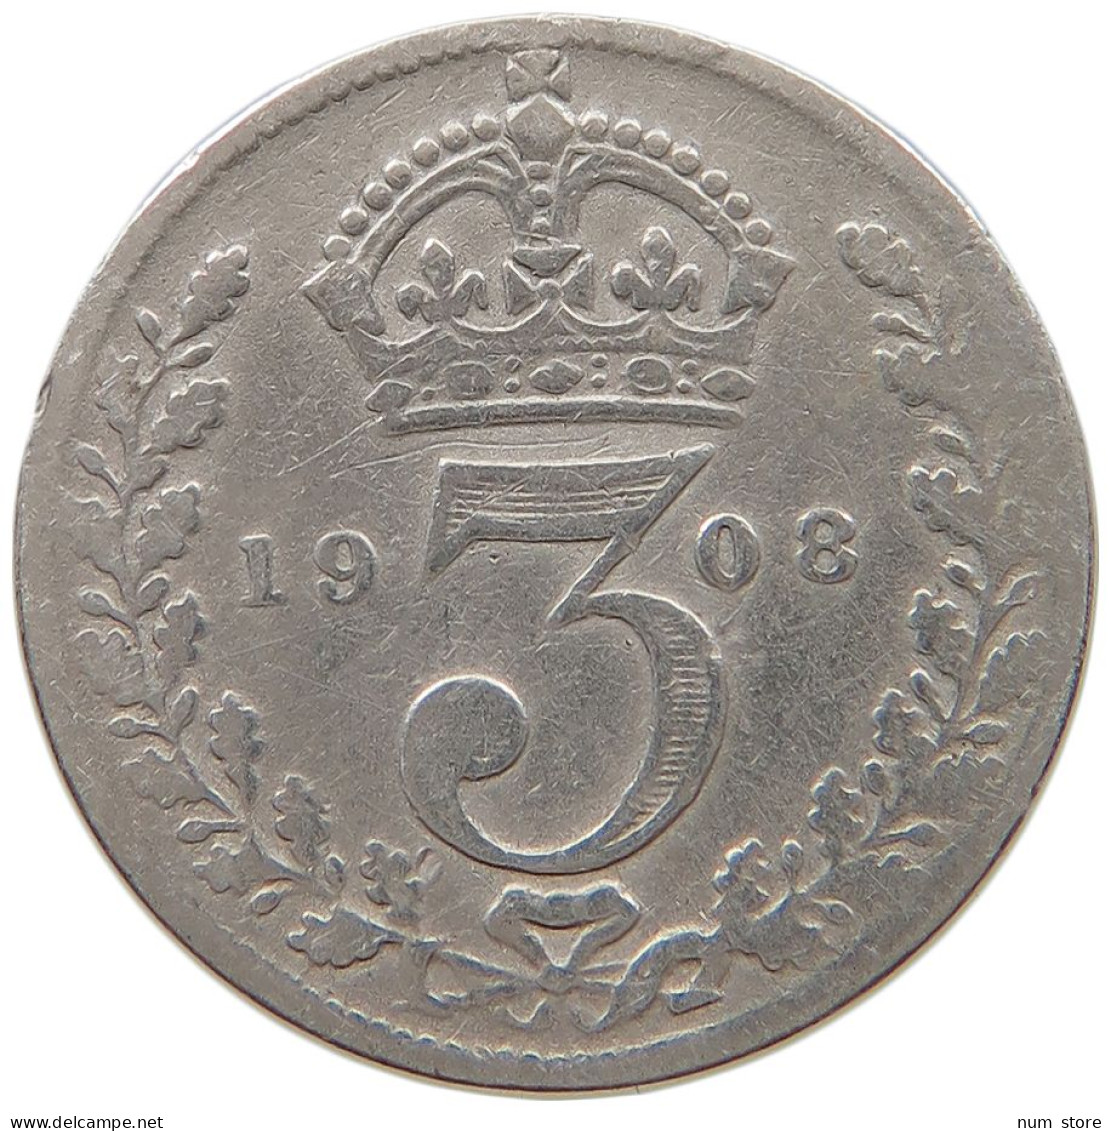 GREAT BRITAIN THREEPENCE 1908 #a063 0599 - F. 3 Pence